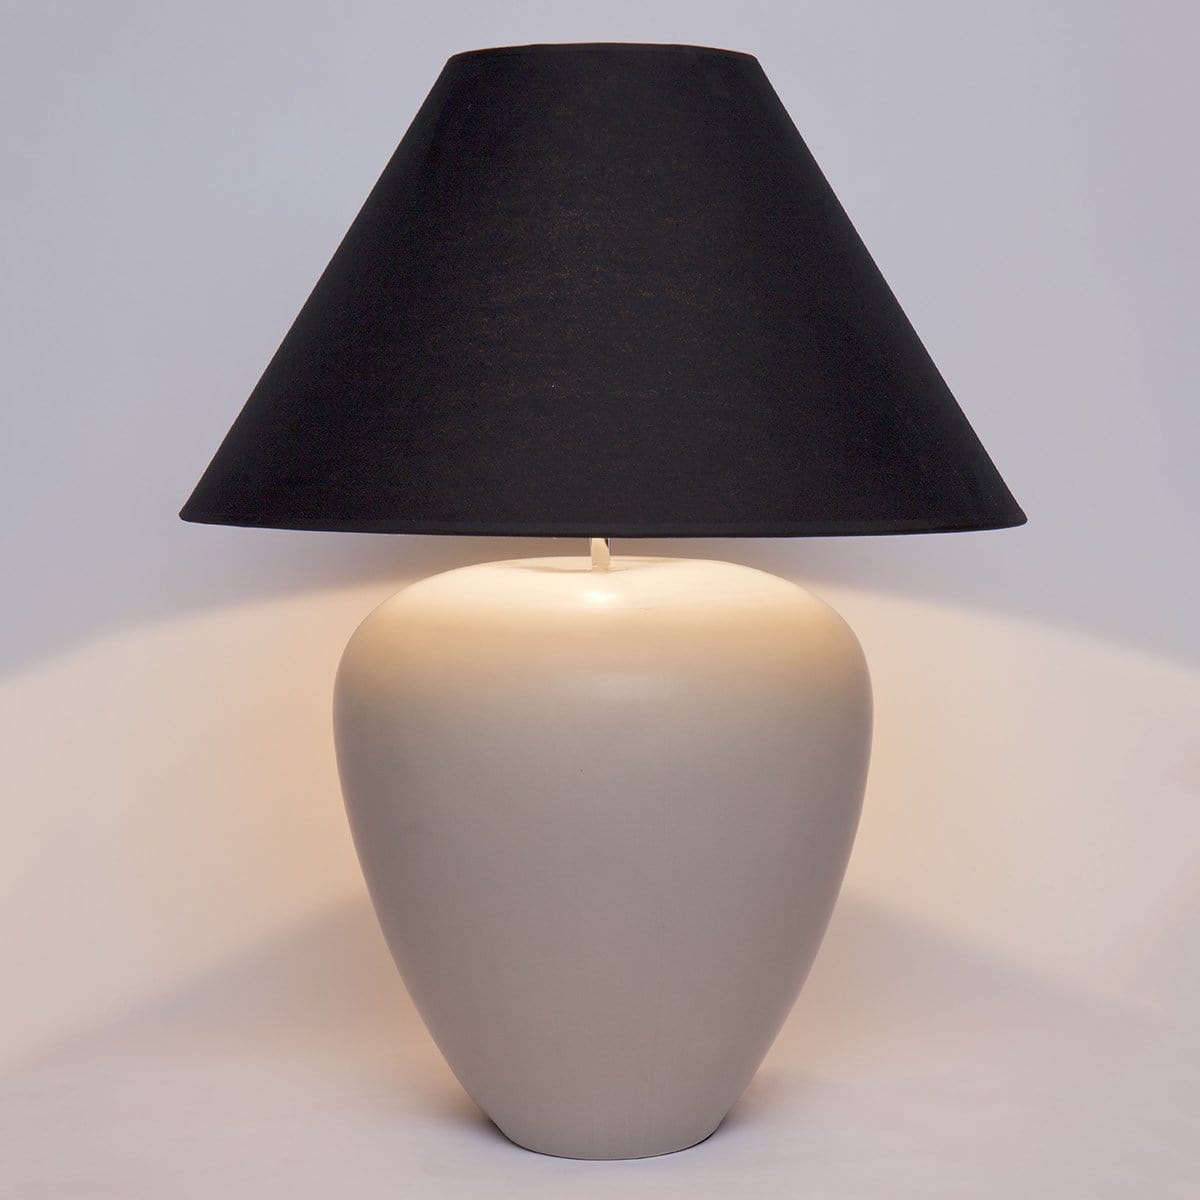 CAFE LIGHTING & LIVING Table Lamp Picasso Table Lamp - Natural w Black Shade B13296